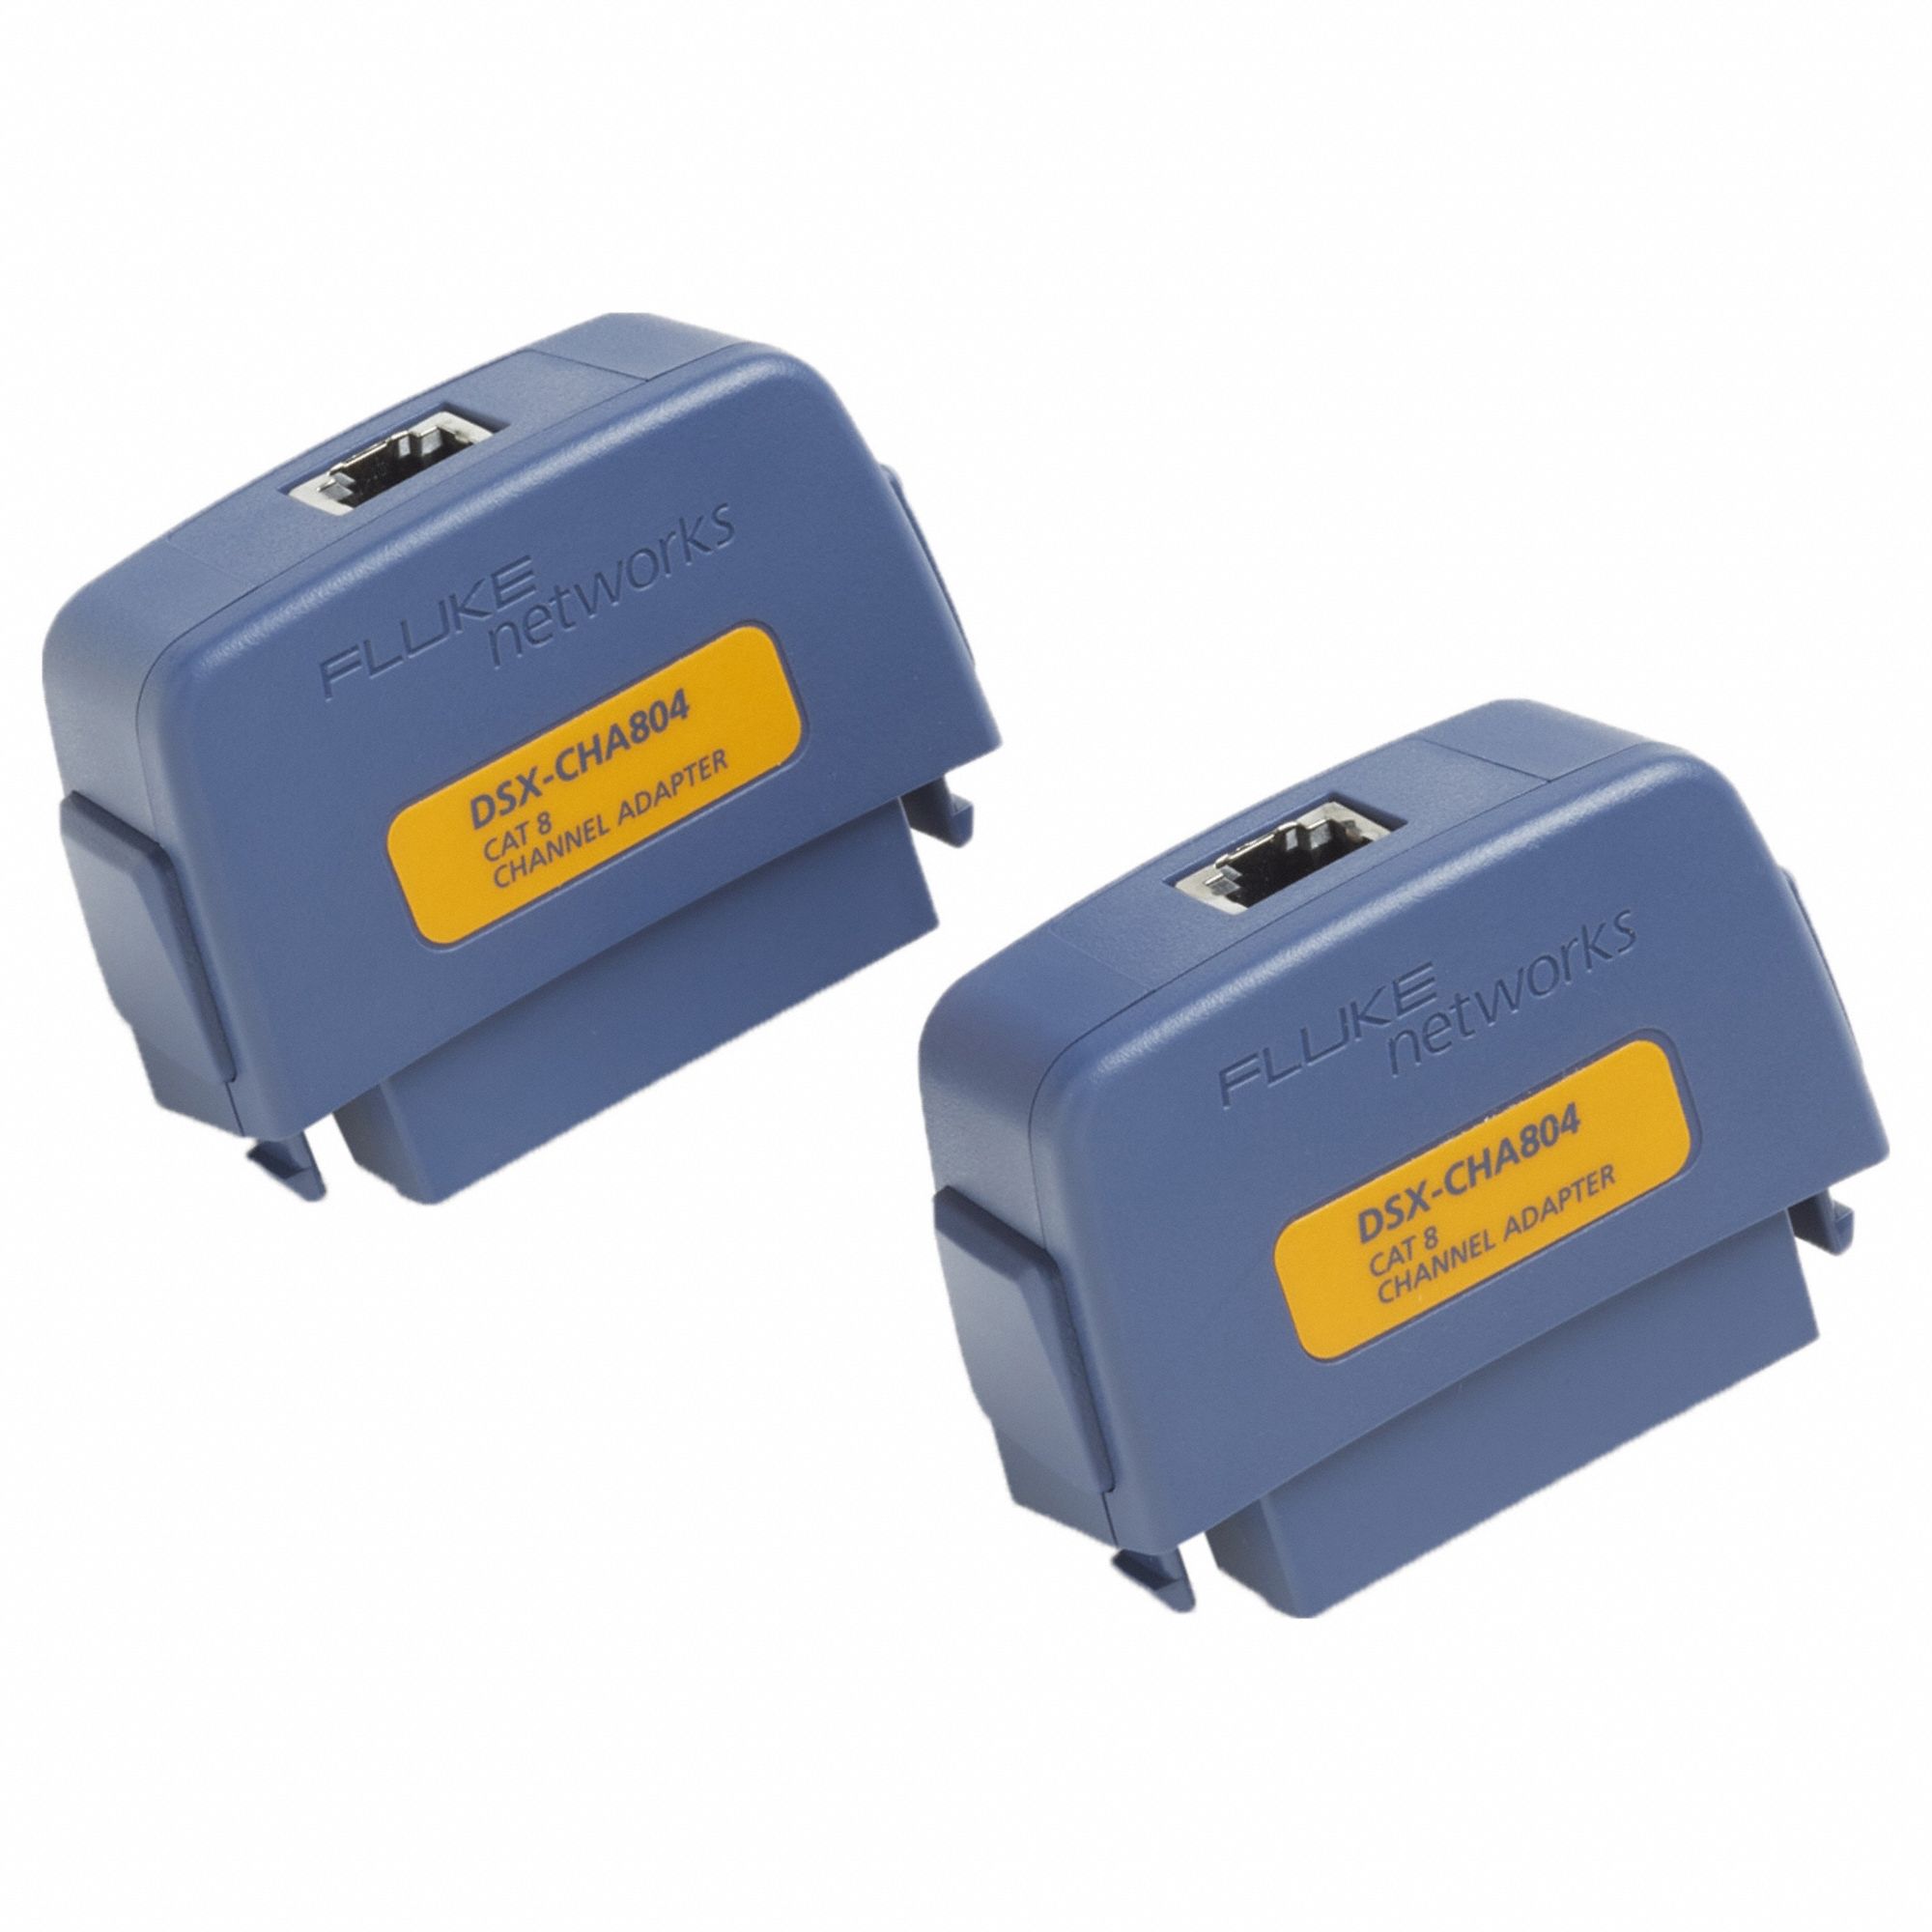 FLUKE NETWORKS Channel Adapter Set: DSX-CHA804S, Channel Adapter